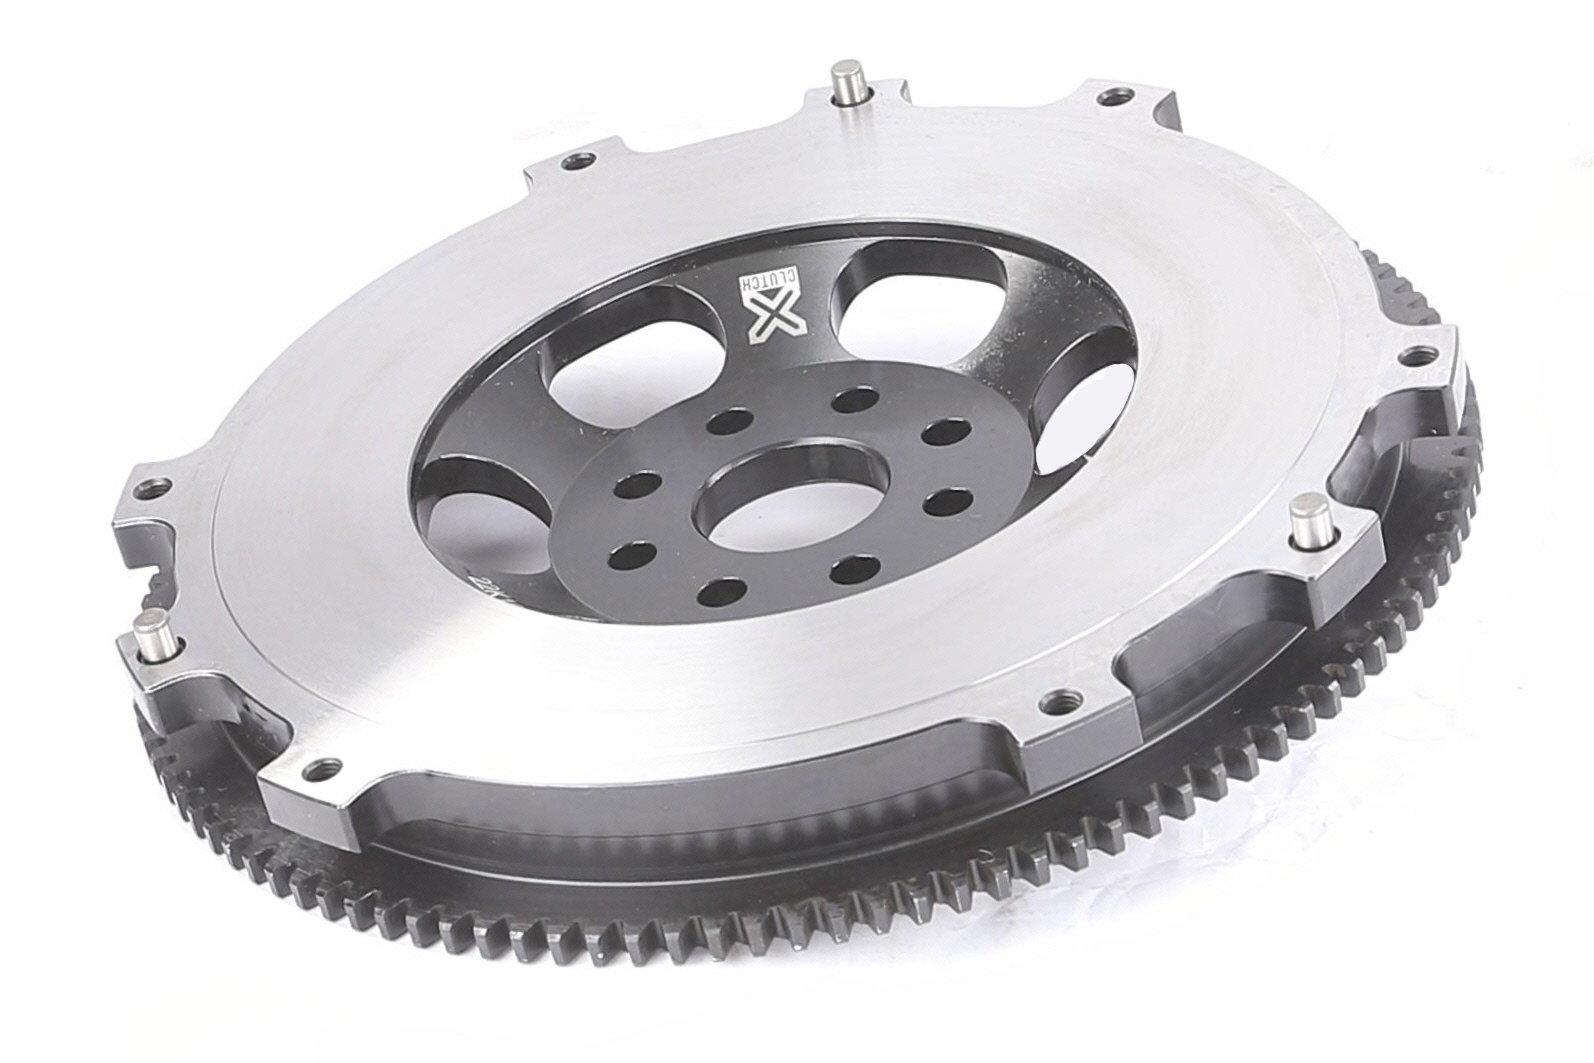 Xtreme Flywheel - Lightweight Chrome-Moly - 5.1kg transport weight CHASER 2.5 (JZX100_)